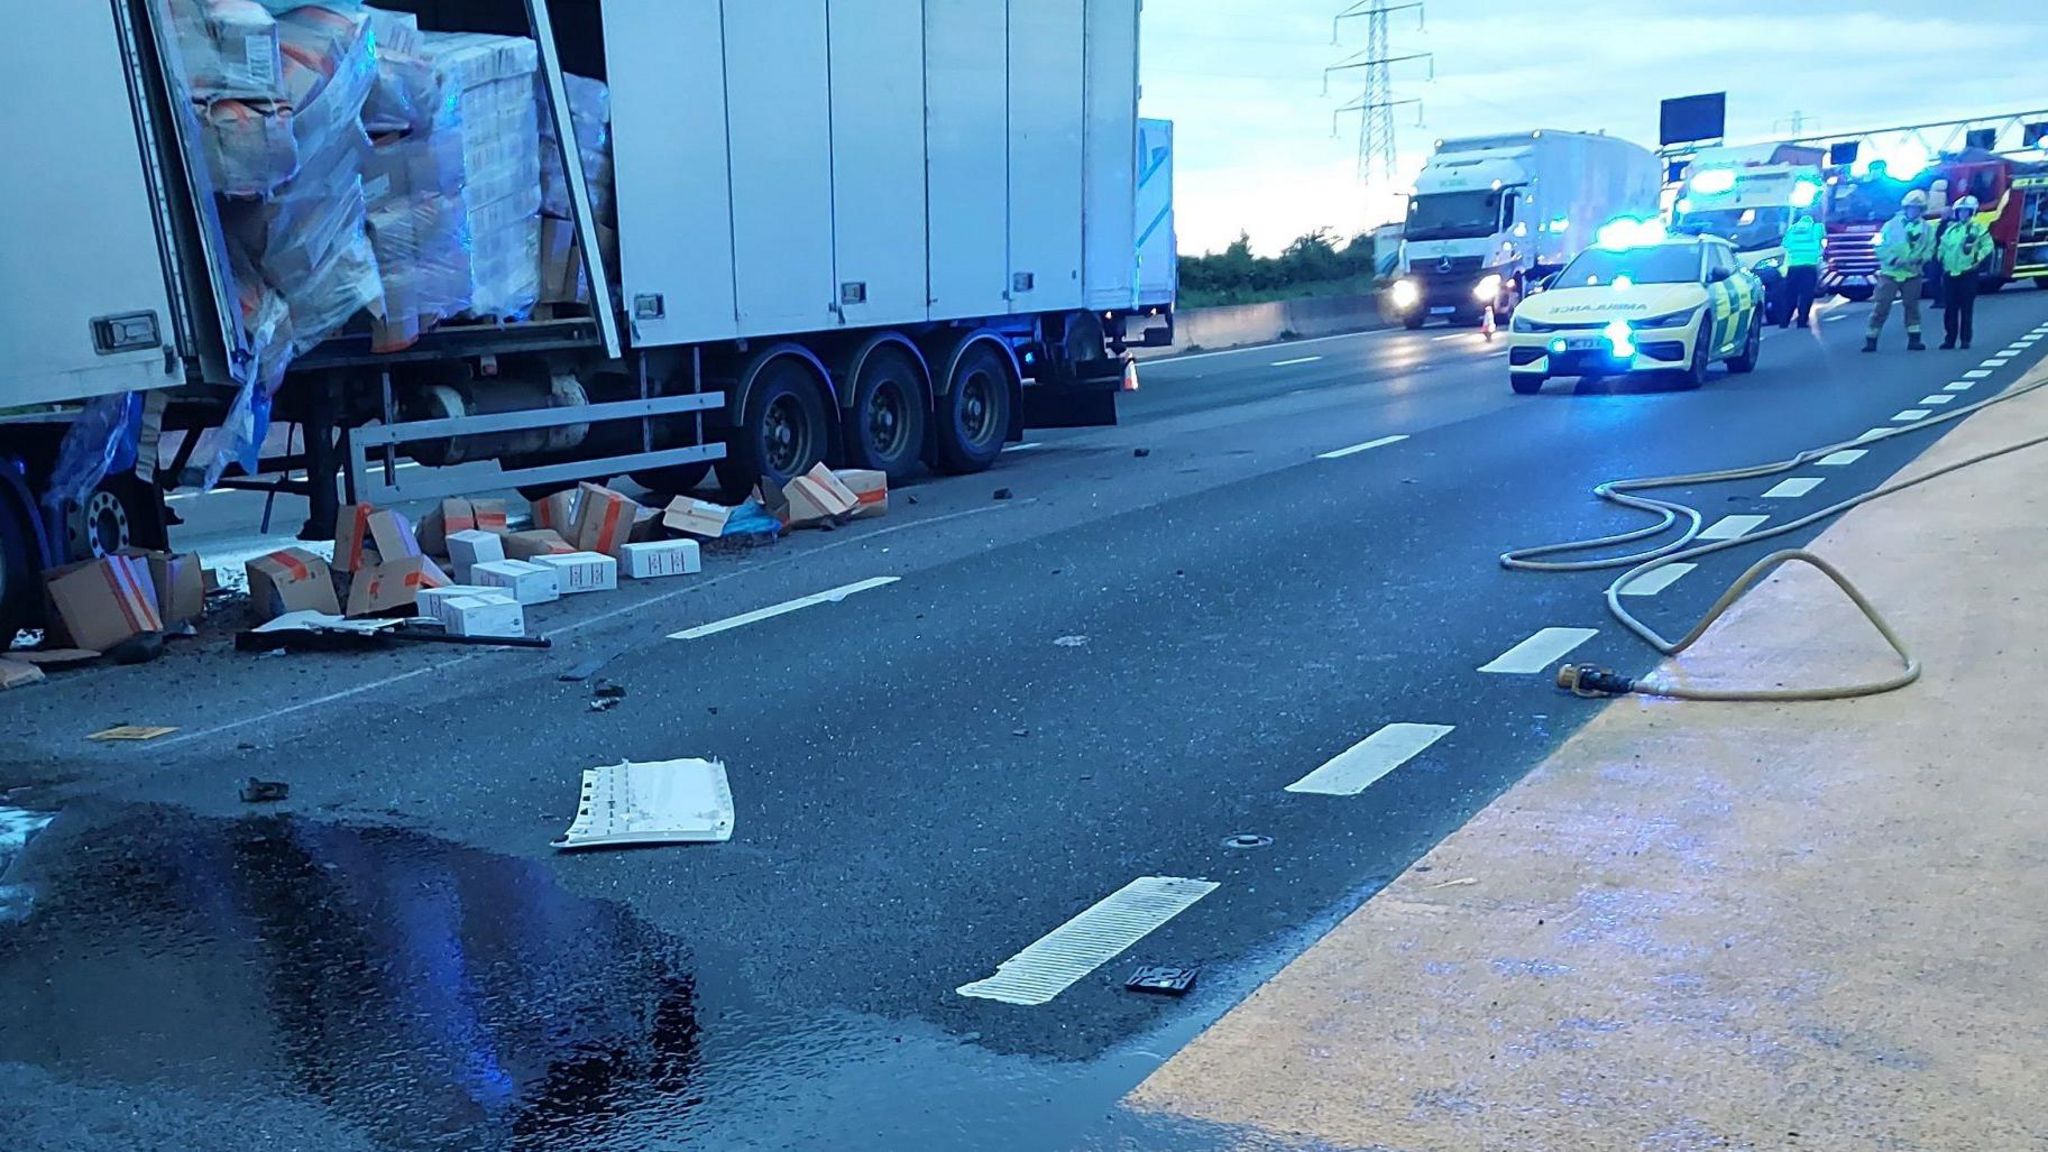 Emergency service vehicles are at the scene, the large white lorry to the left has the side broken open and boxes are on the floor and spilling from the side